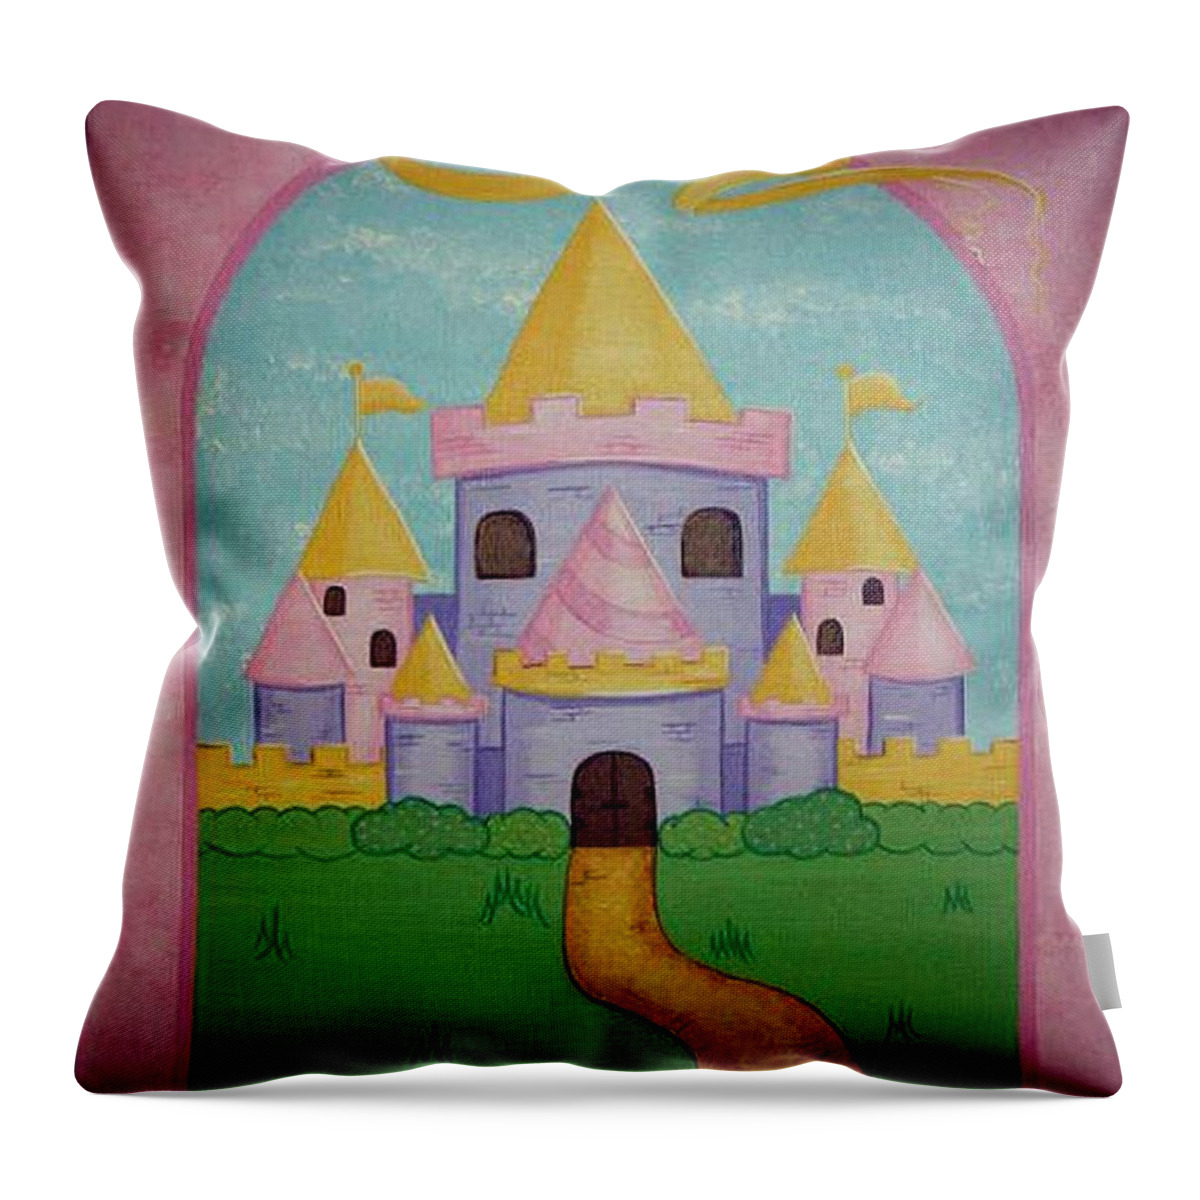 Castle Throw Pillow featuring the painting Fairytale Castle by Valerie Carpenter